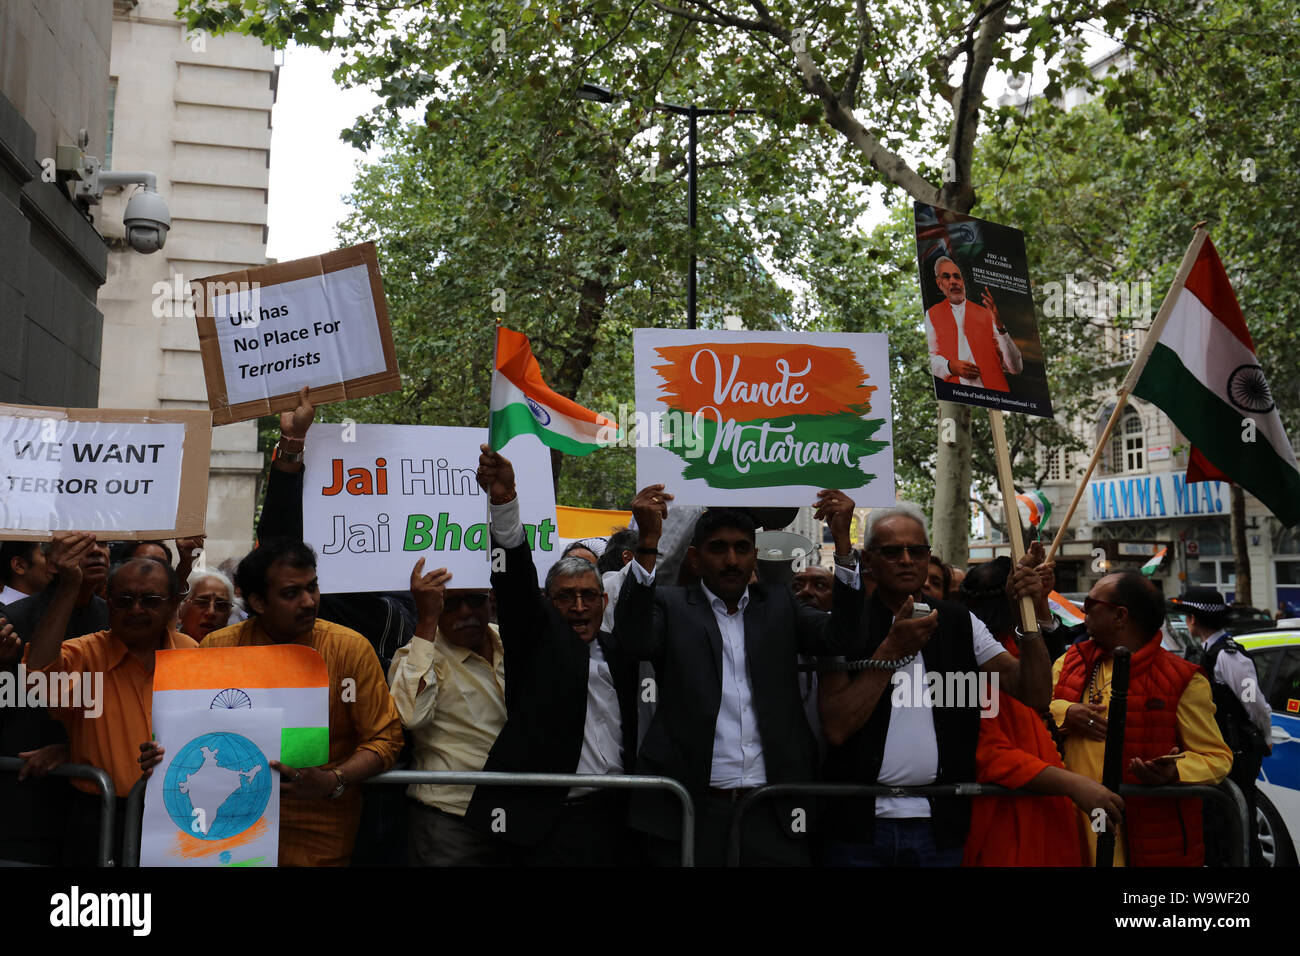 London, UK. 15th August, 2019. India supporters in front of India House in London, after its government scrapped the special constitutional status of Kashmir, clashing with protesters of Kashmir. Credit: Joe Kuis / Alamy News Stock Photo